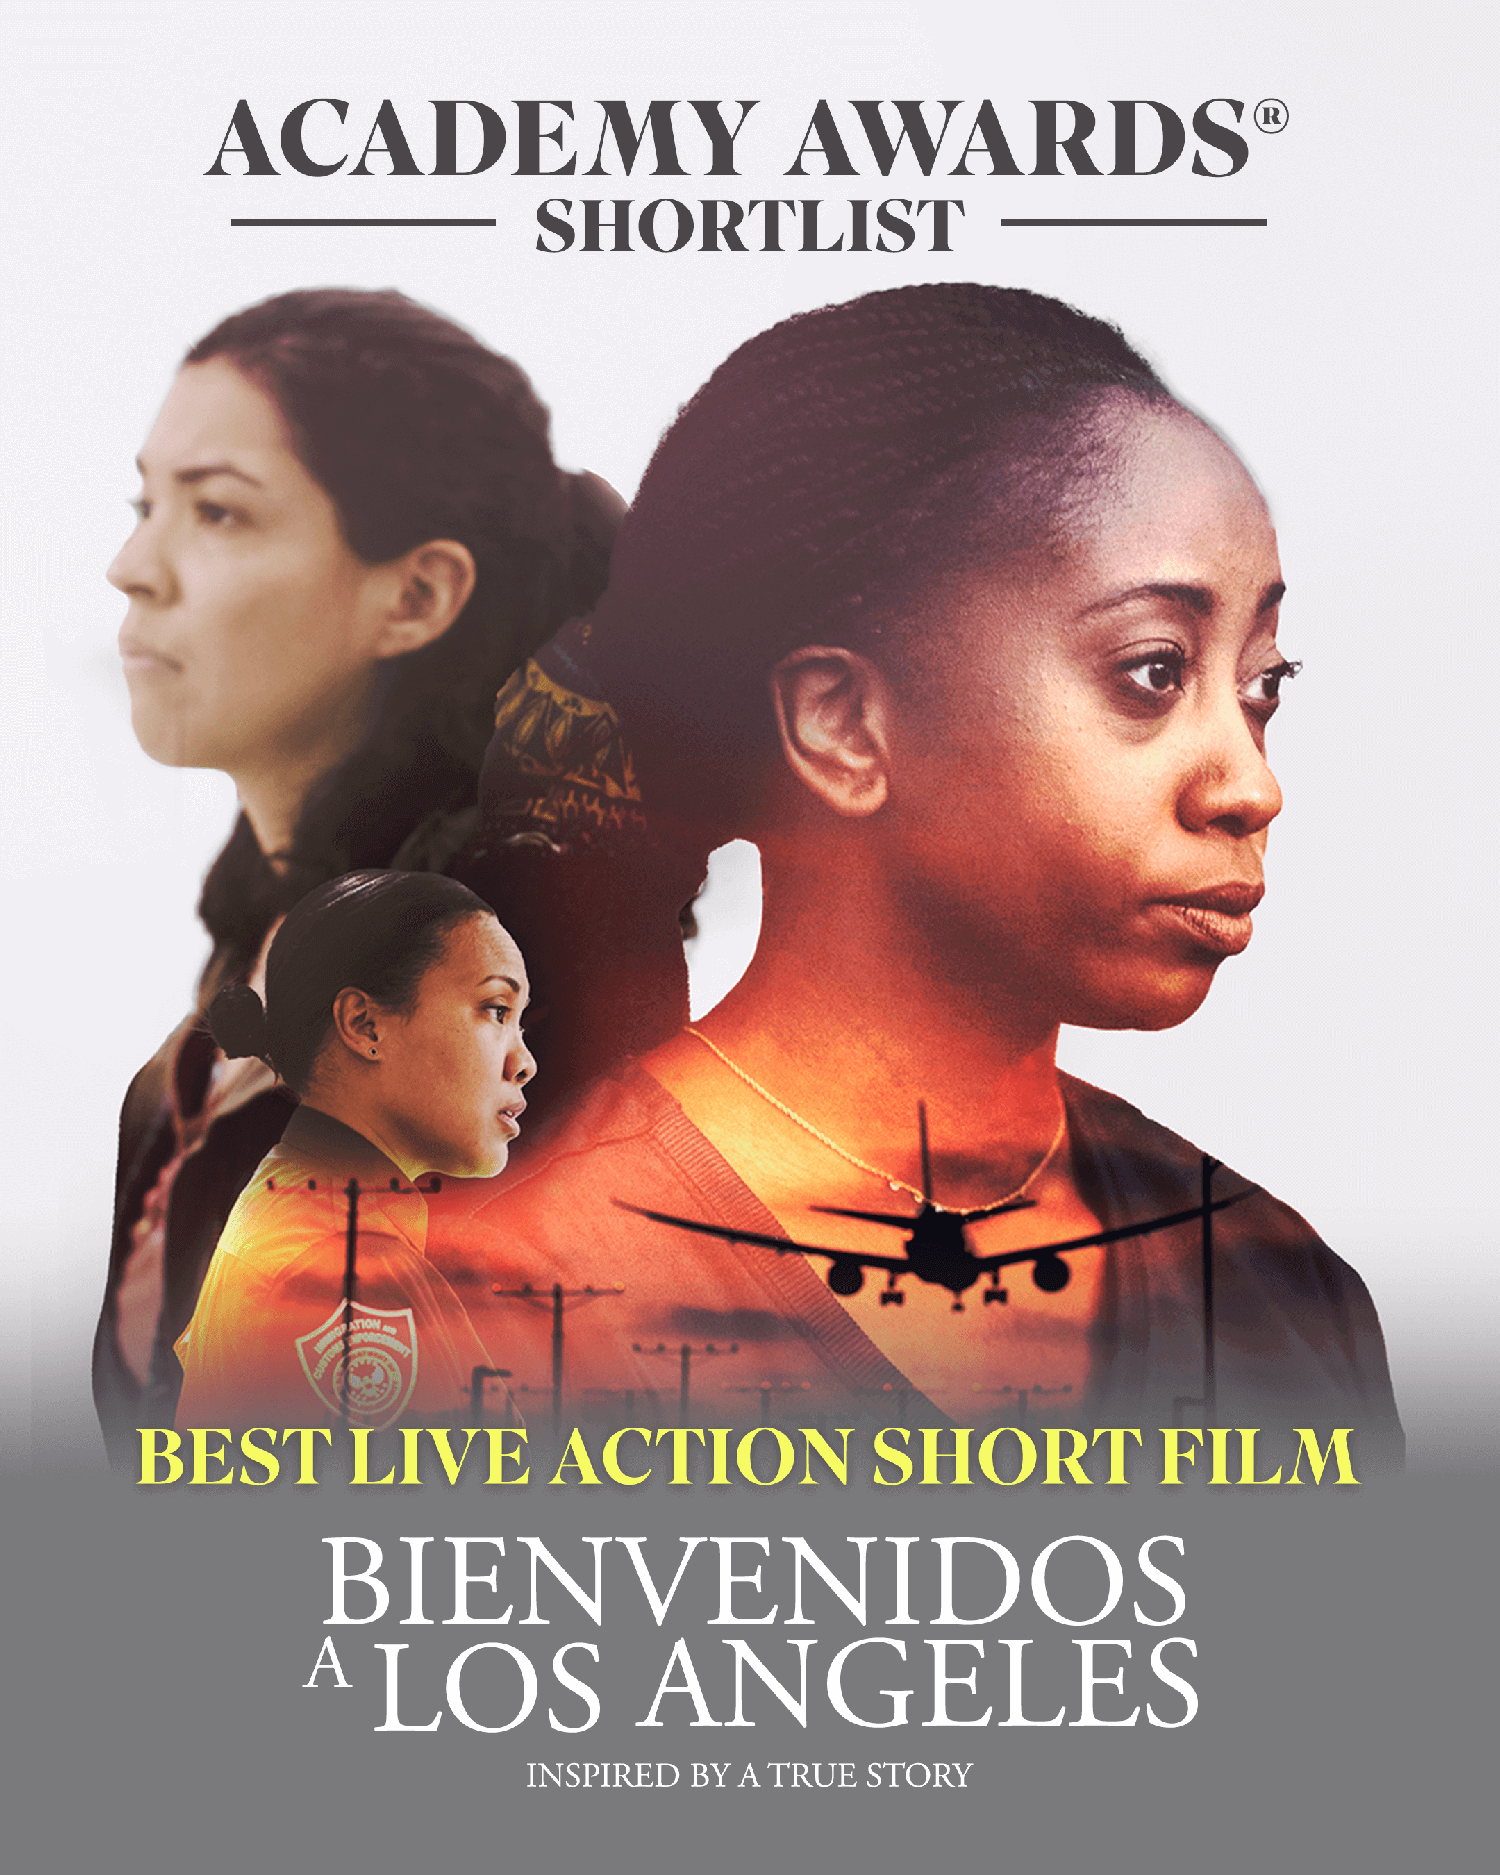 FOR YOUR CONSIDERATION: BEST LIVE ACTION SHORT FILM